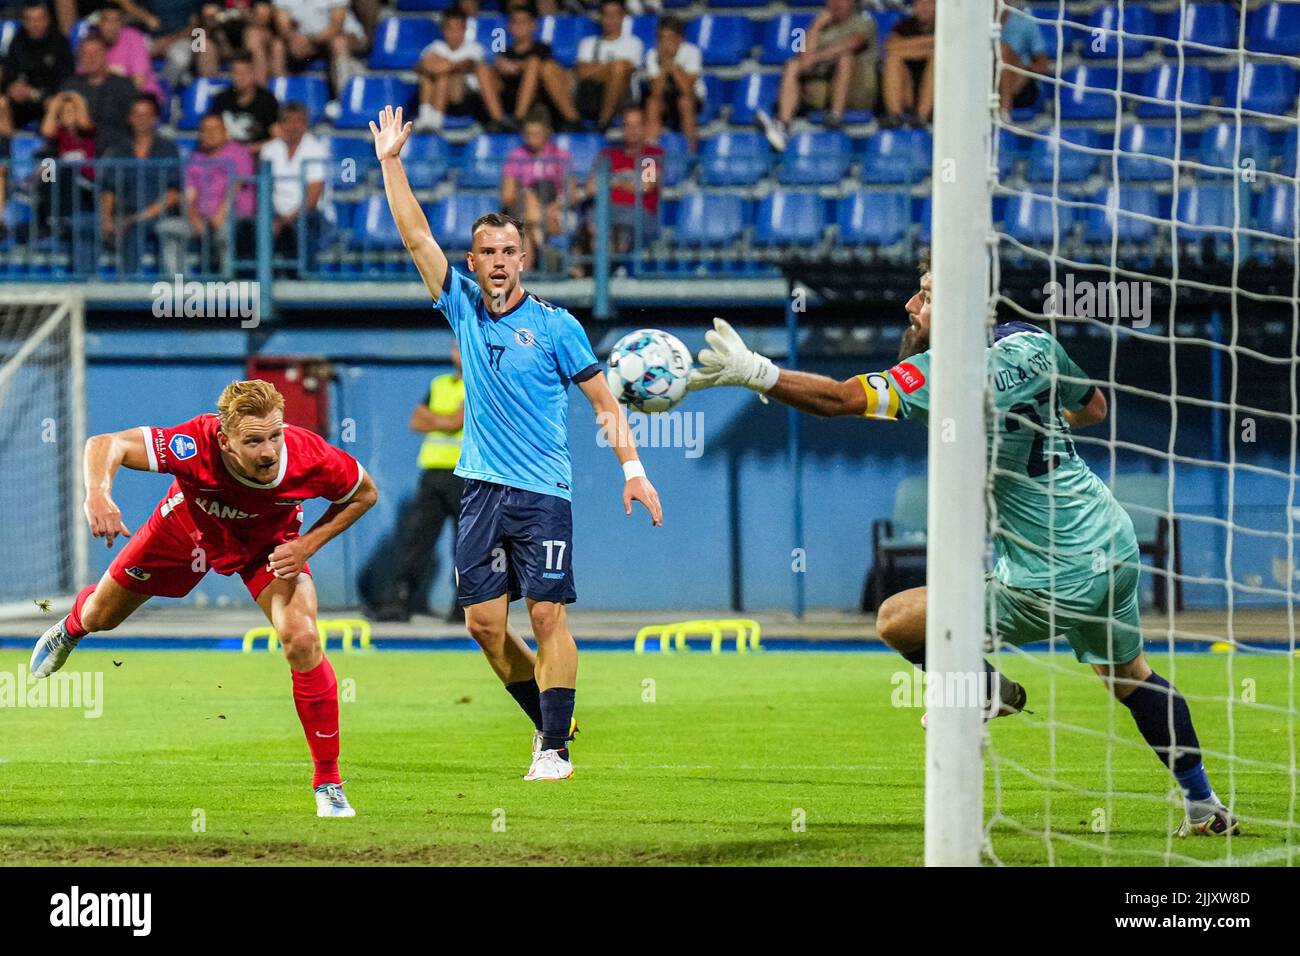 SARAJEVO - Dani de Wit of AZ Alkmaar scores the 0-1 during the second qualifying round of the Conference League match between FK Tuzla City and AZ at the stadium Grbavica on July 28, 2022 in Sarajevo, Bosnia and Herzegovina. ANP ED OF THE POL Stock Photo